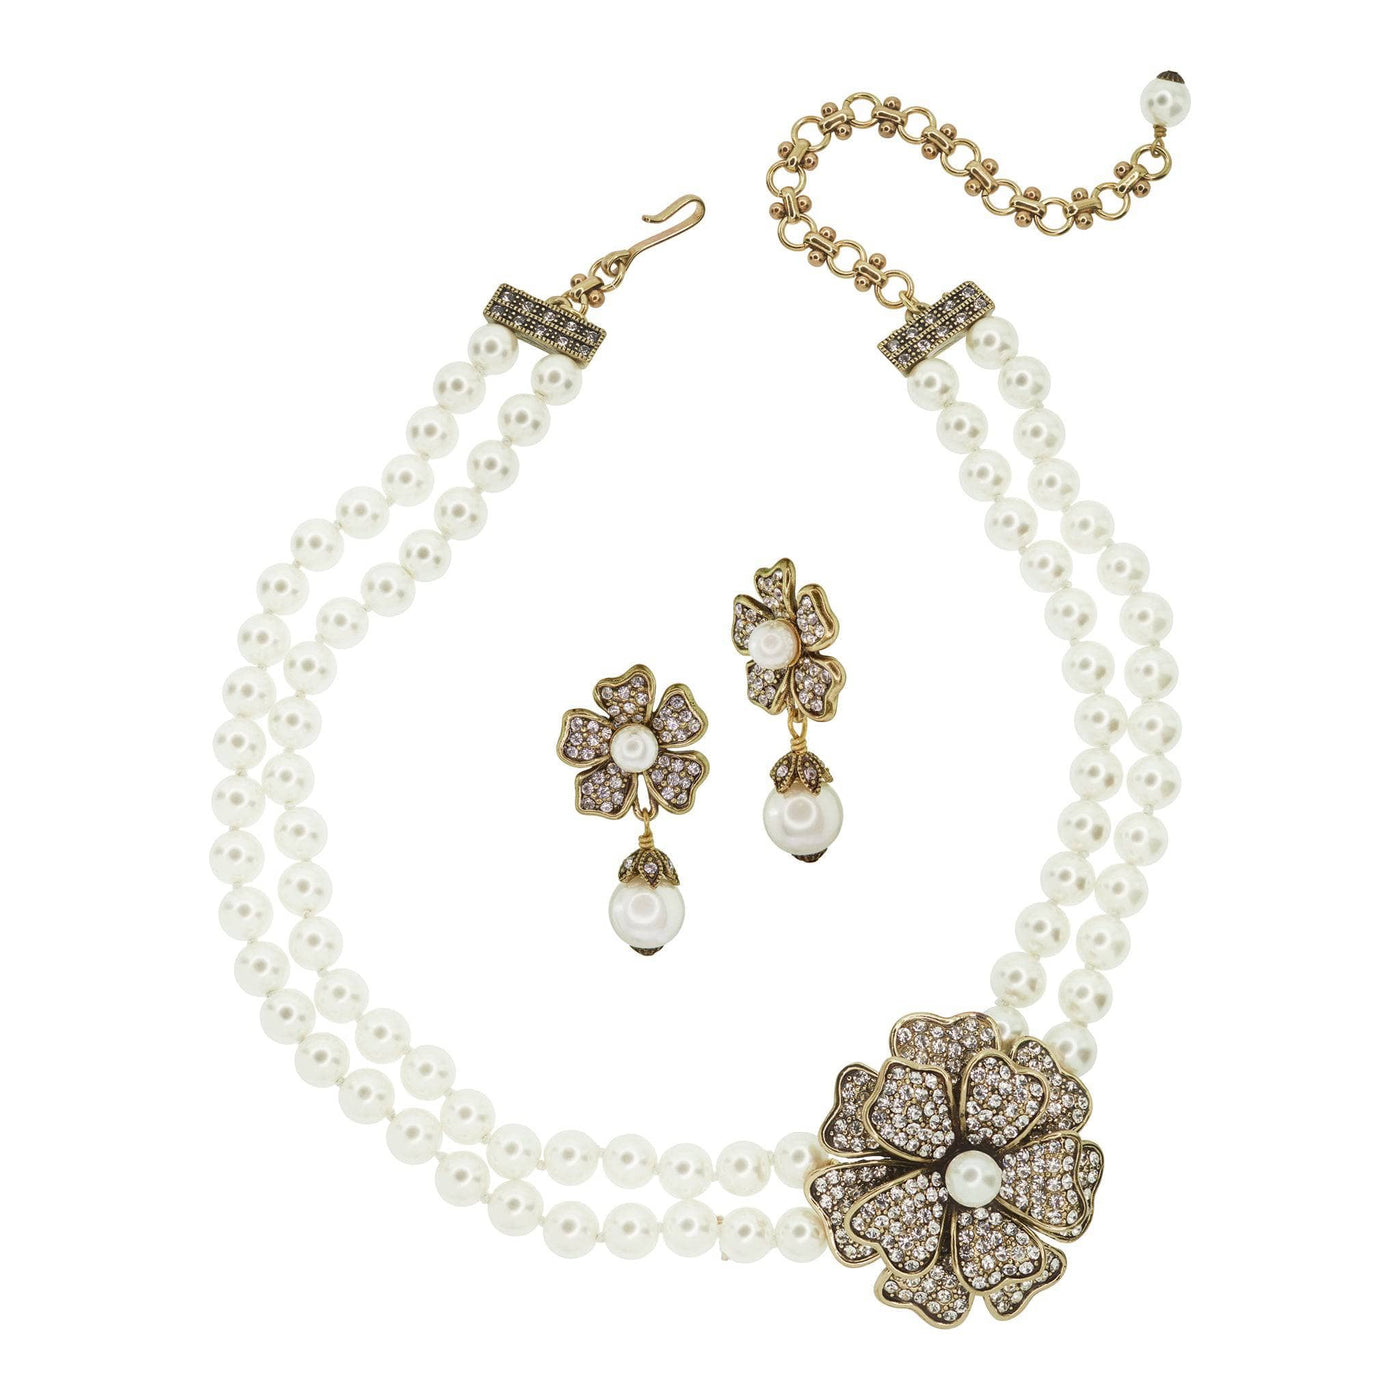 Heidi Daus® "Passionate Posey" Beaded Crystal Earring & Necklace Floral Set